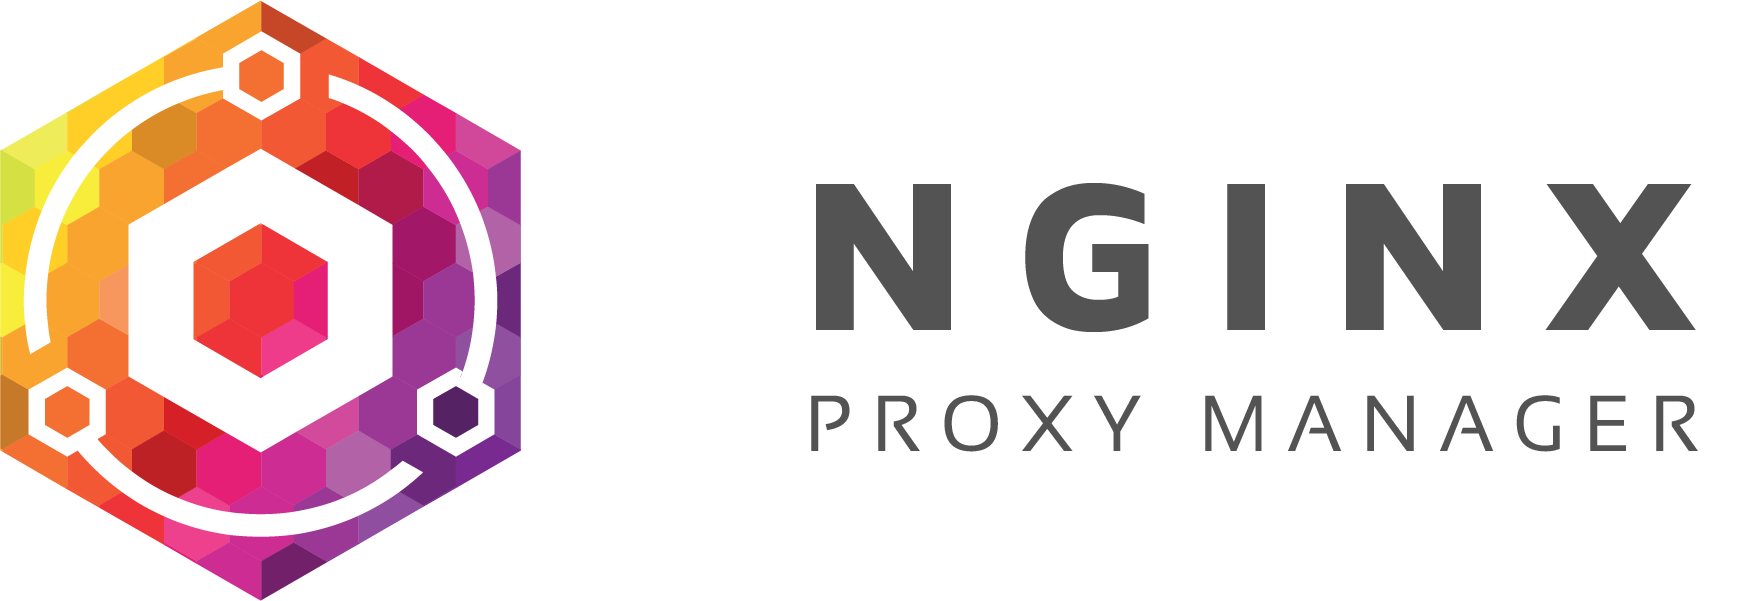 How to Install Nginx Proxy Manager with SQLite3 in Docker